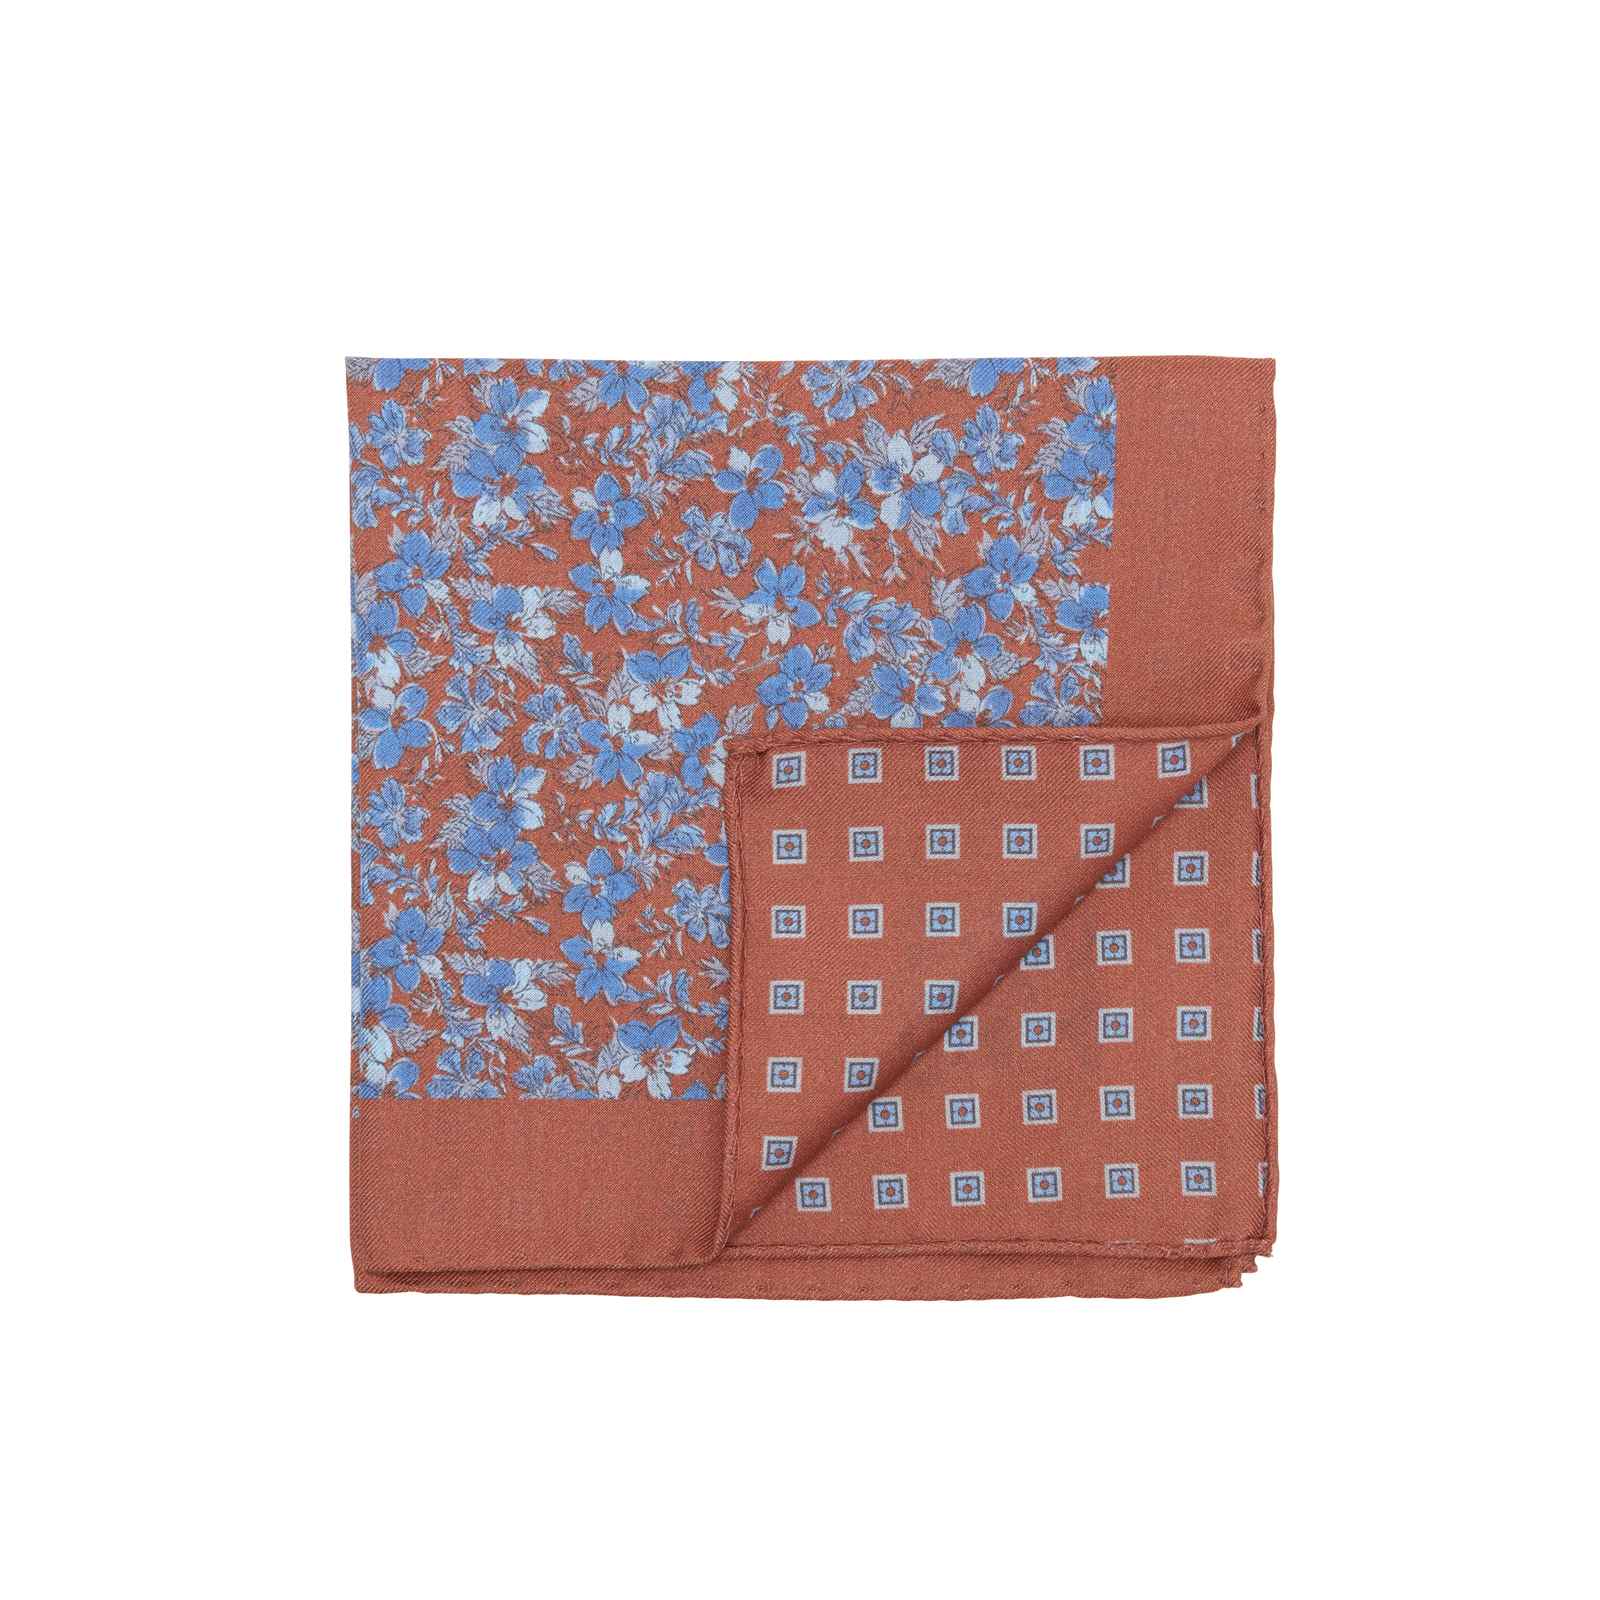 Burnt Orange and Blue Double Sided Flowers and Square Medallions Pocket ...